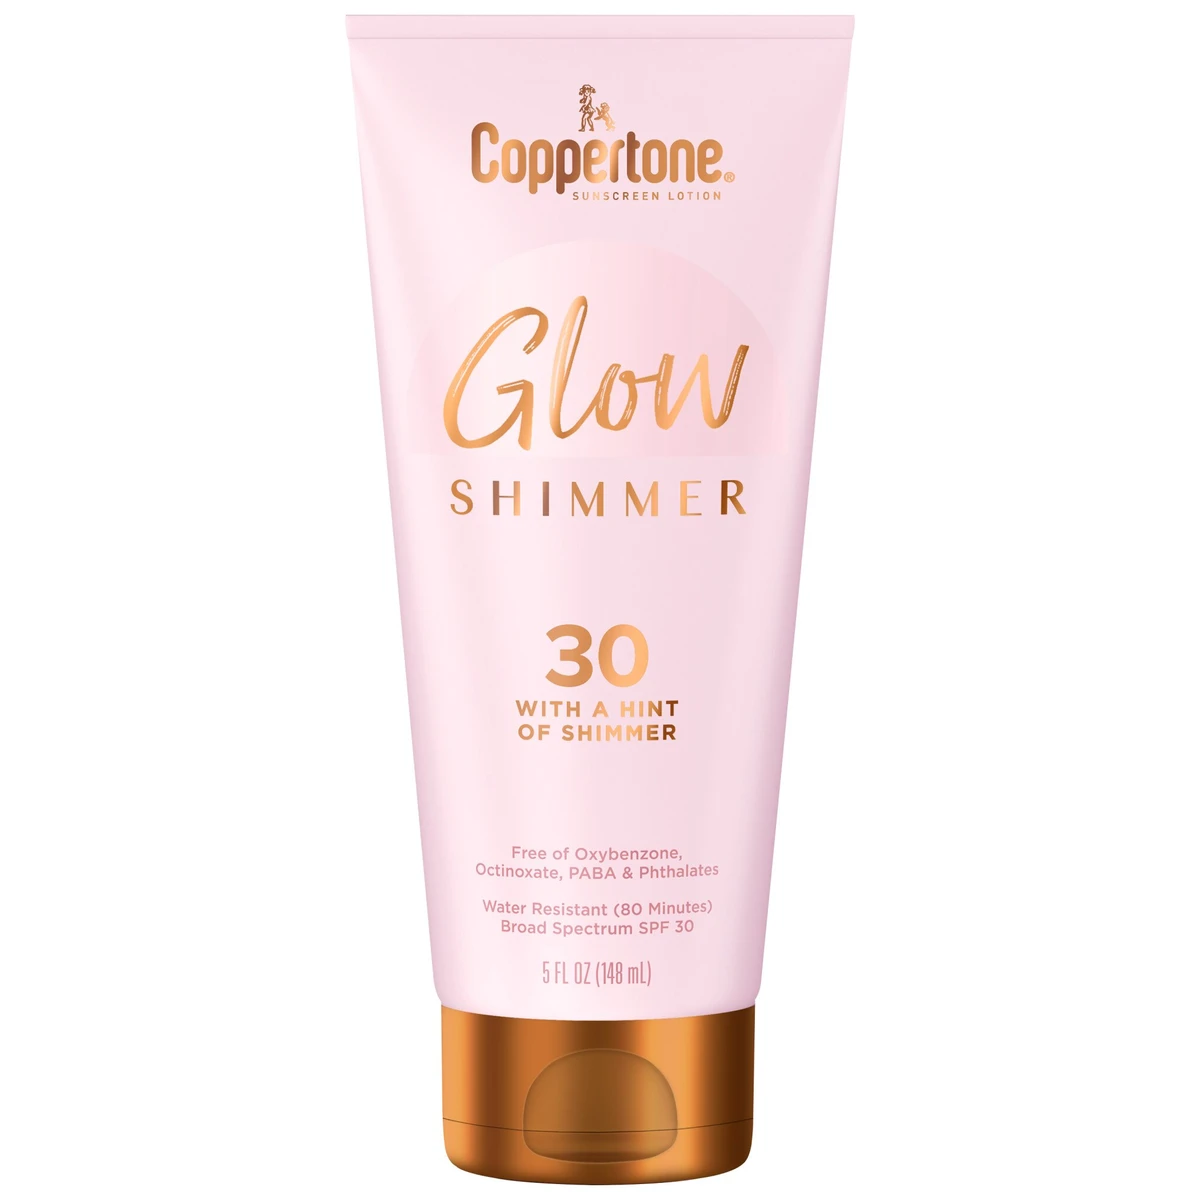 Coppertone Glow With Shimmer Sunscreen Lotion  SPF 30  5 fl oz